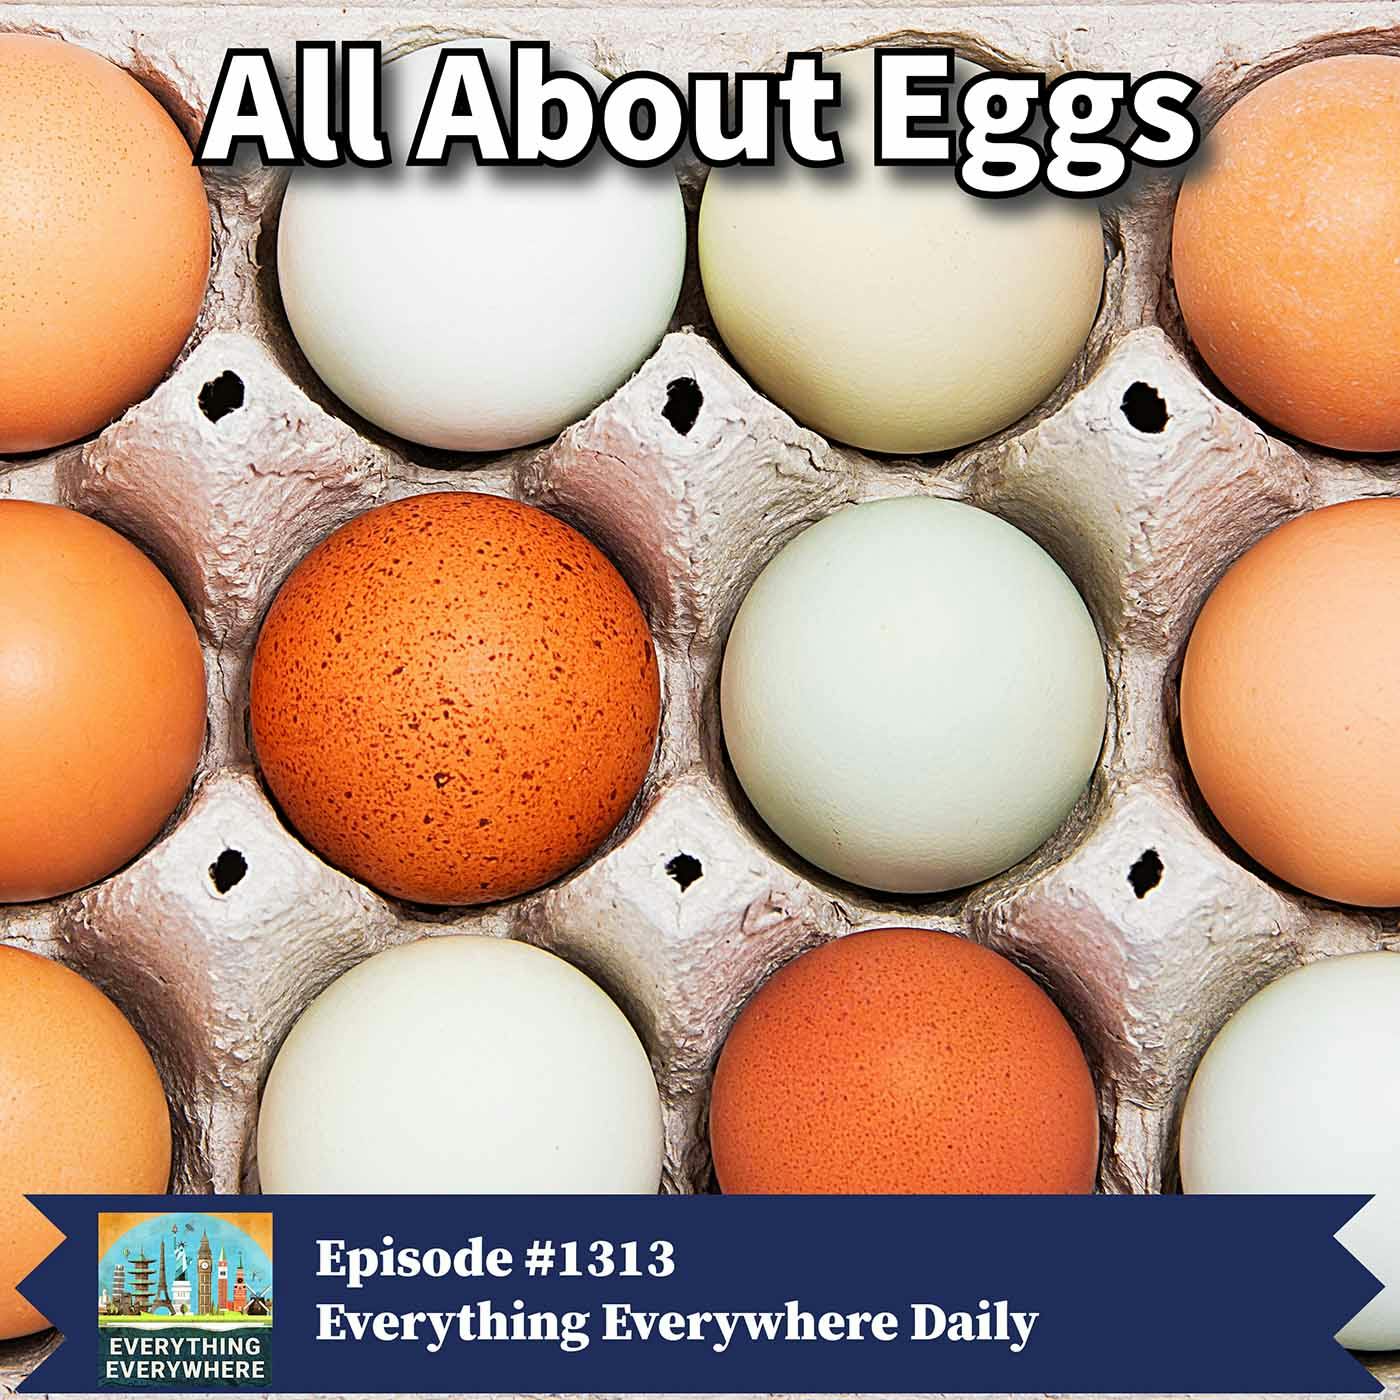 Everything You Ever Wanted To Know About Eggs